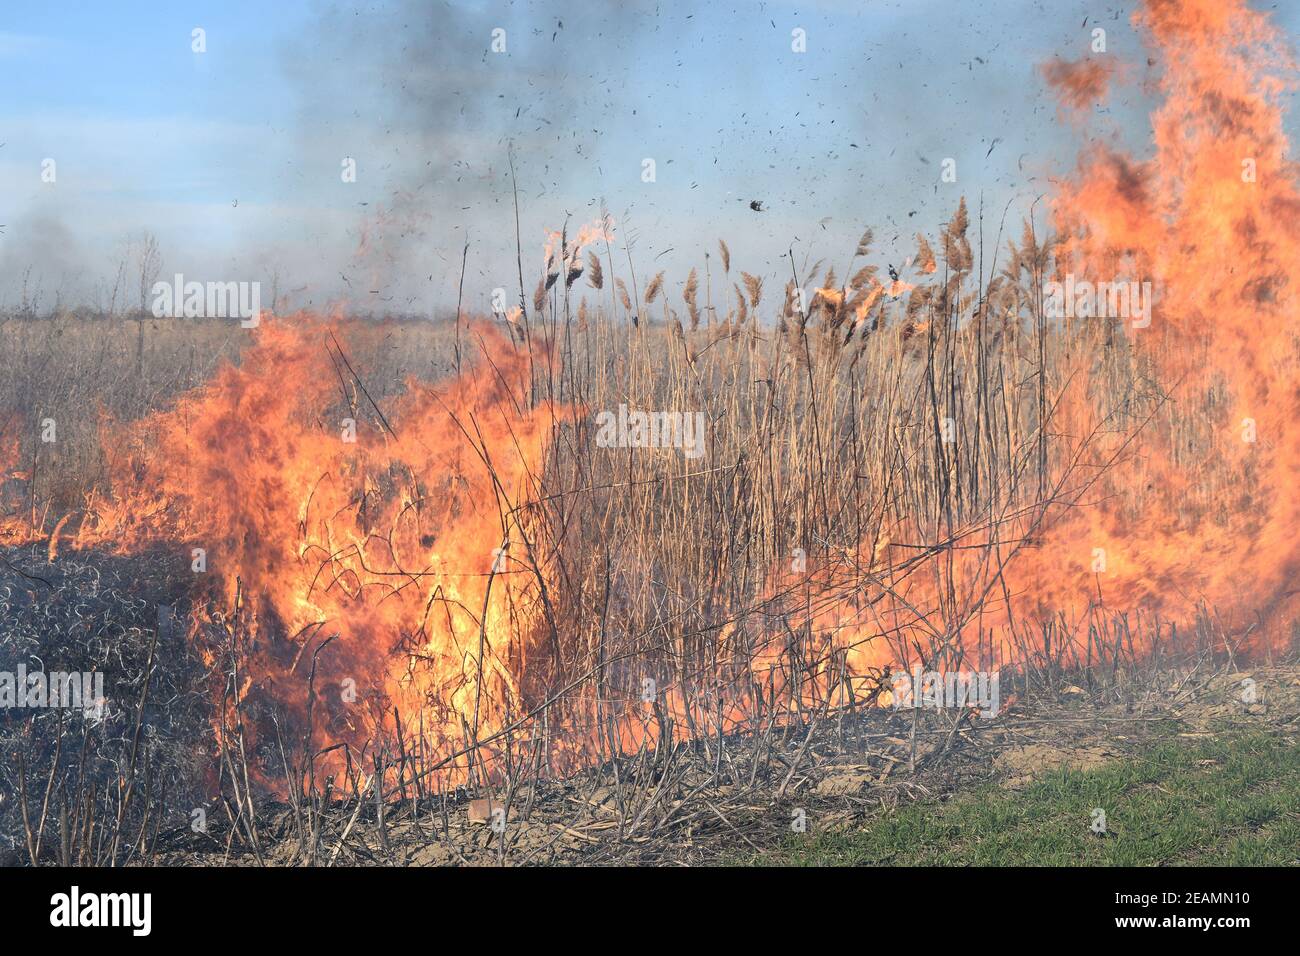 Burning dry grass and reeds Stock Photo